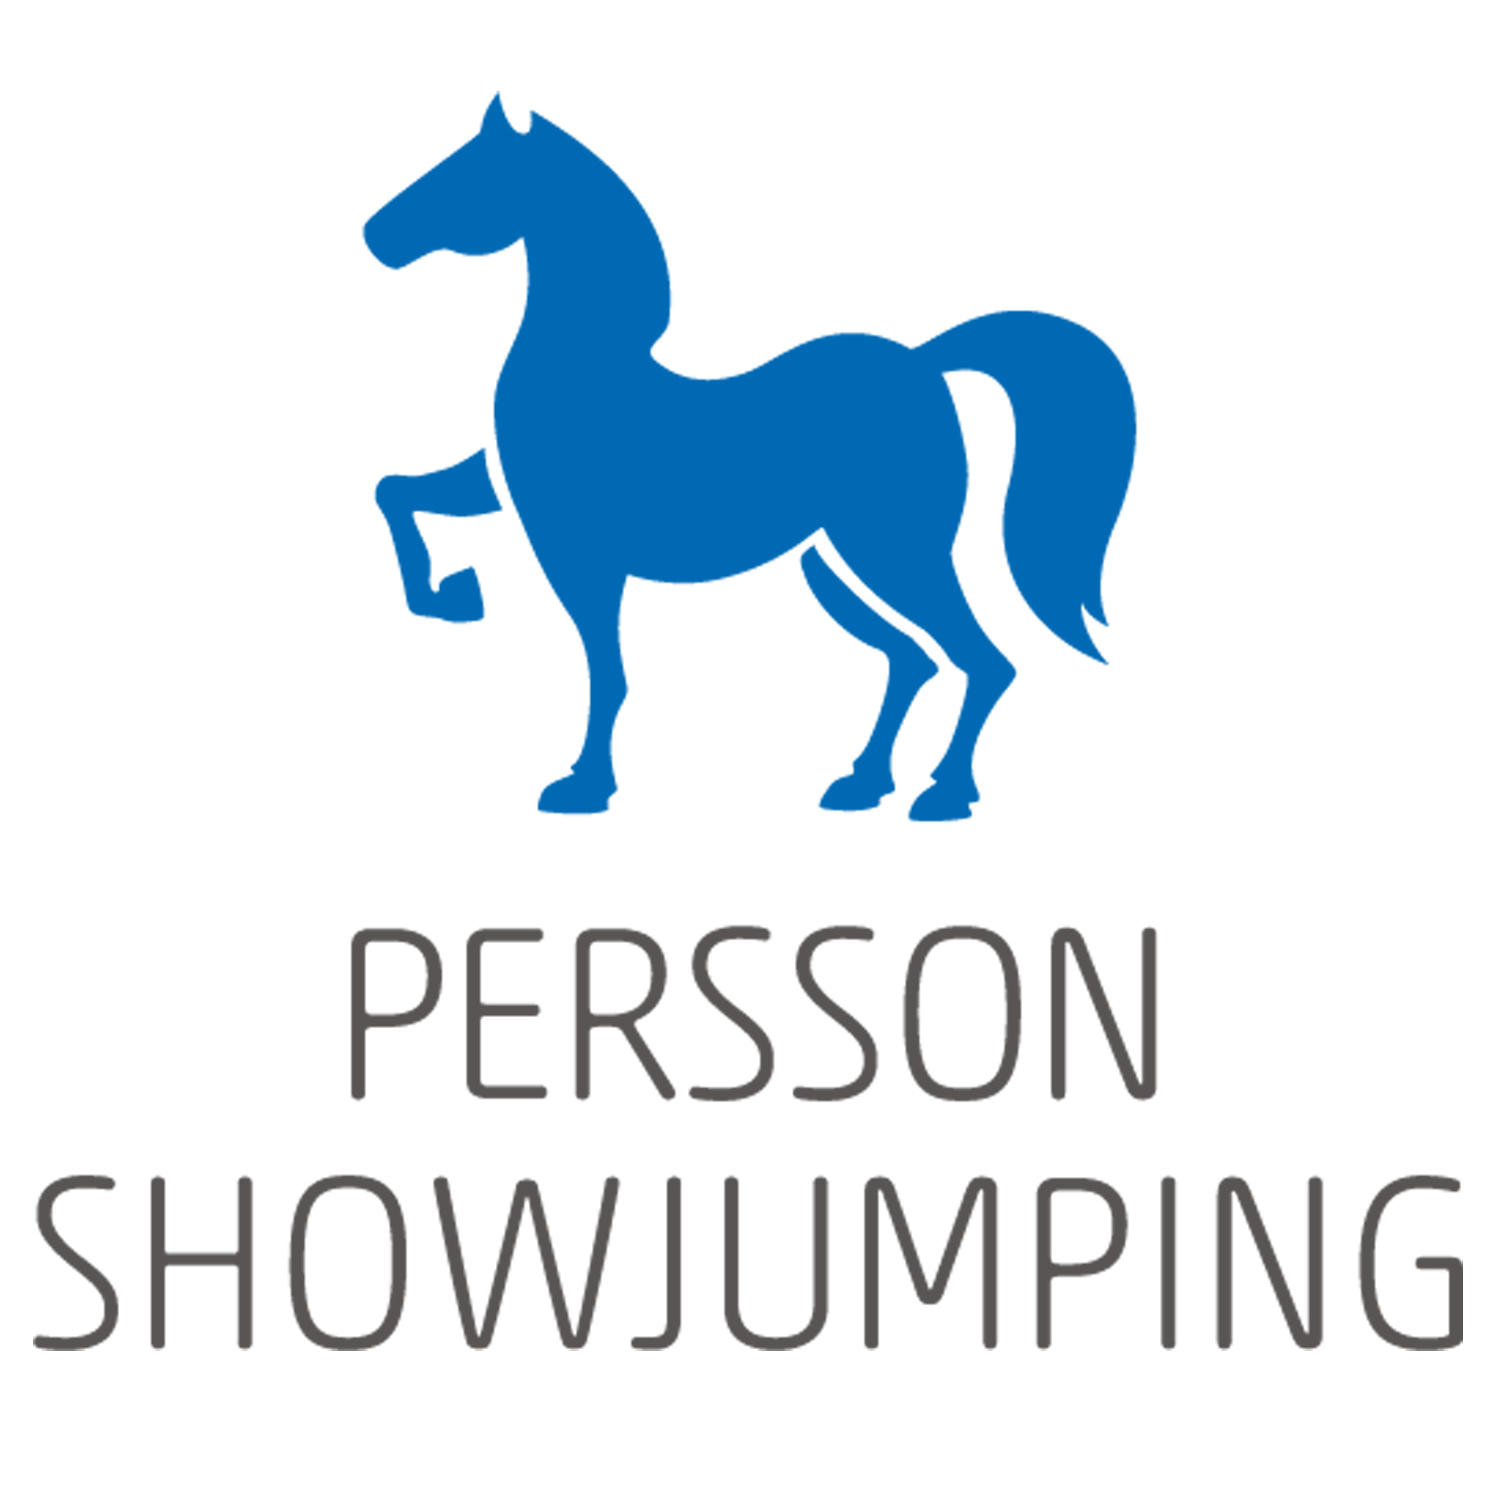 (c) Persson-showjumping.com